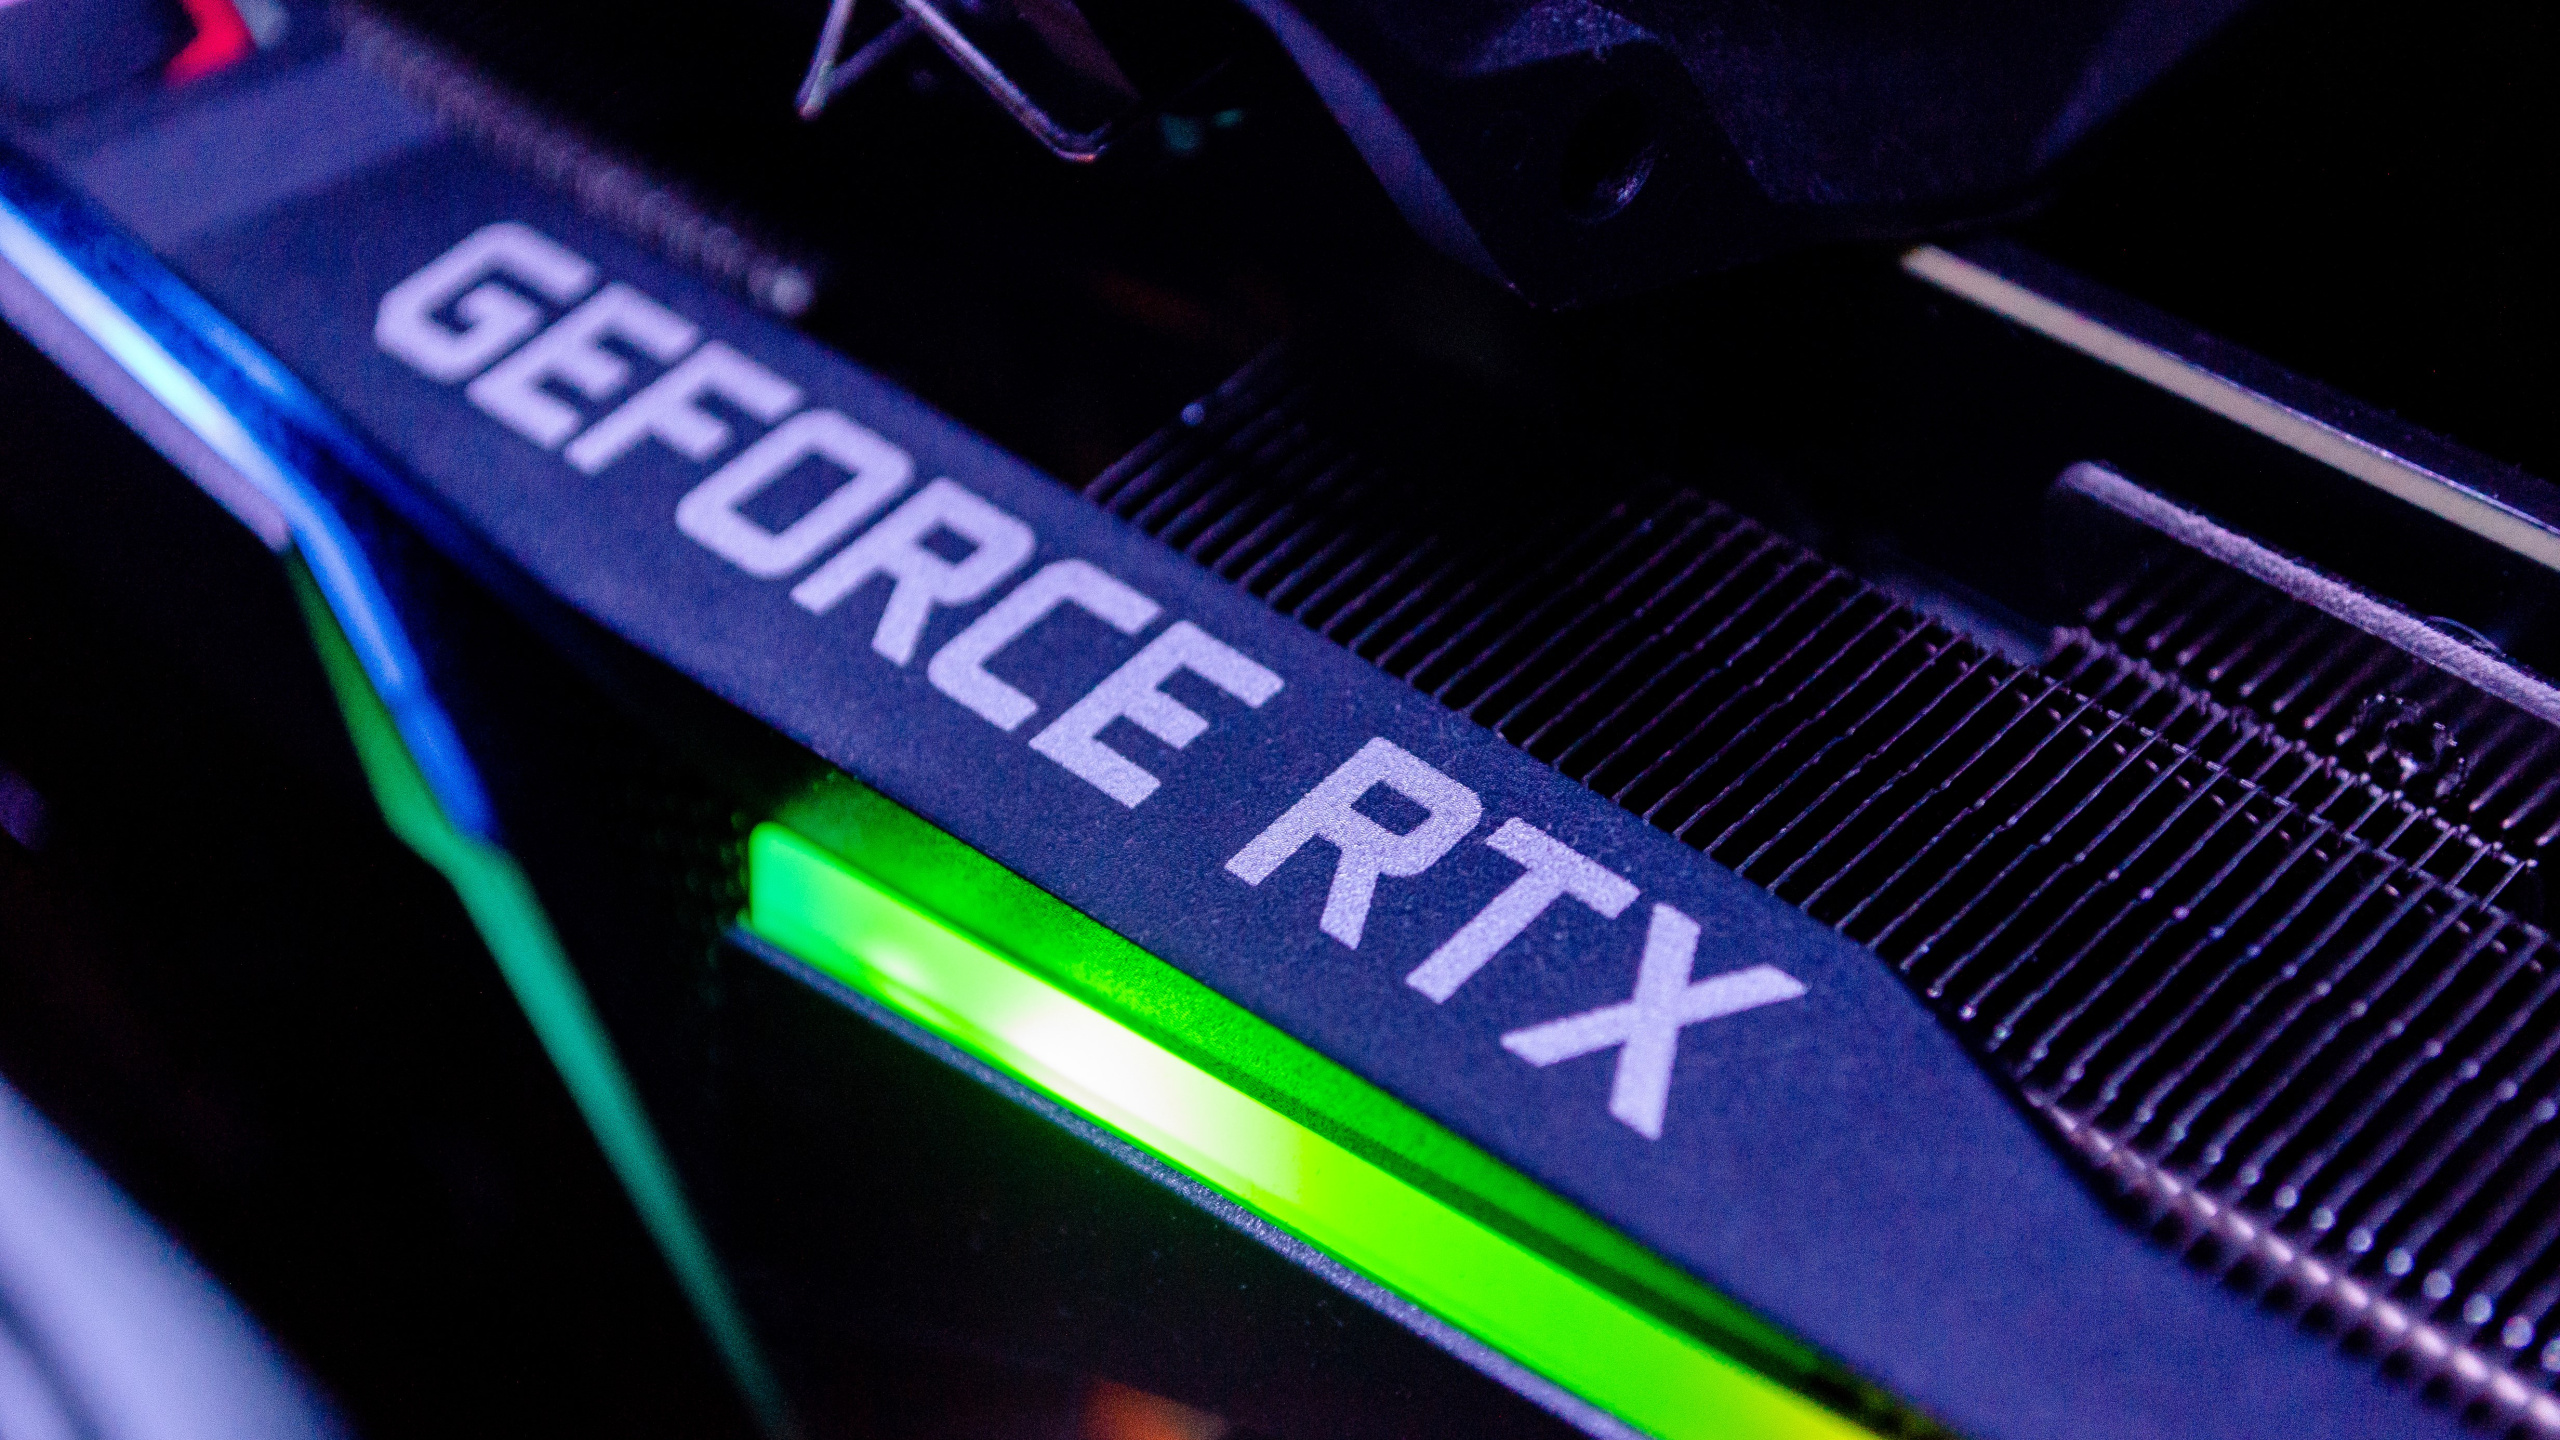 The Nvidia RTX 4070 Ti Super seems to be a completely new hybrid graphics card model